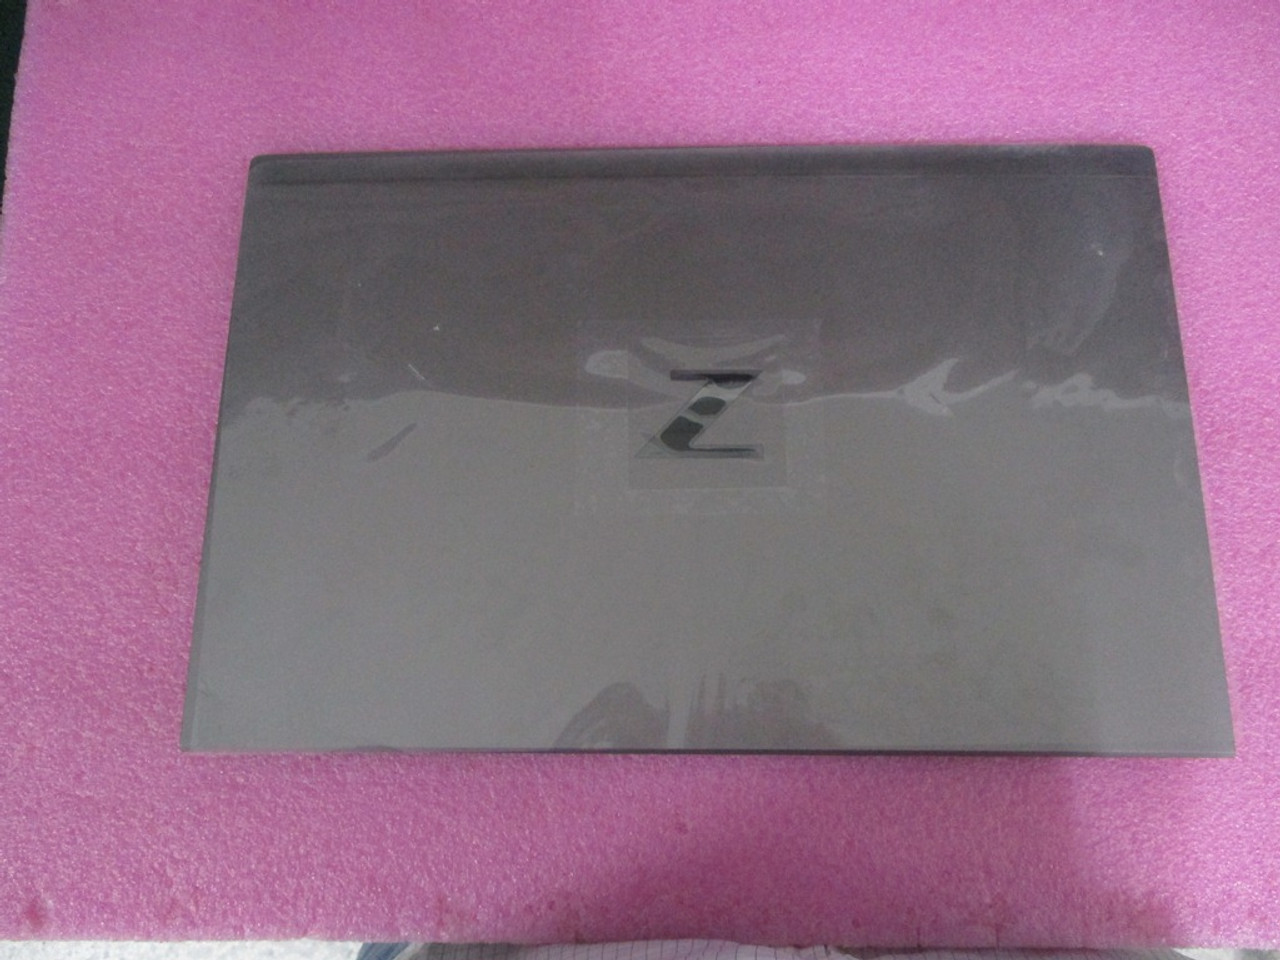 LCD BACK COVER WIRELESS WIDE AREA NETWORK - M14242-001